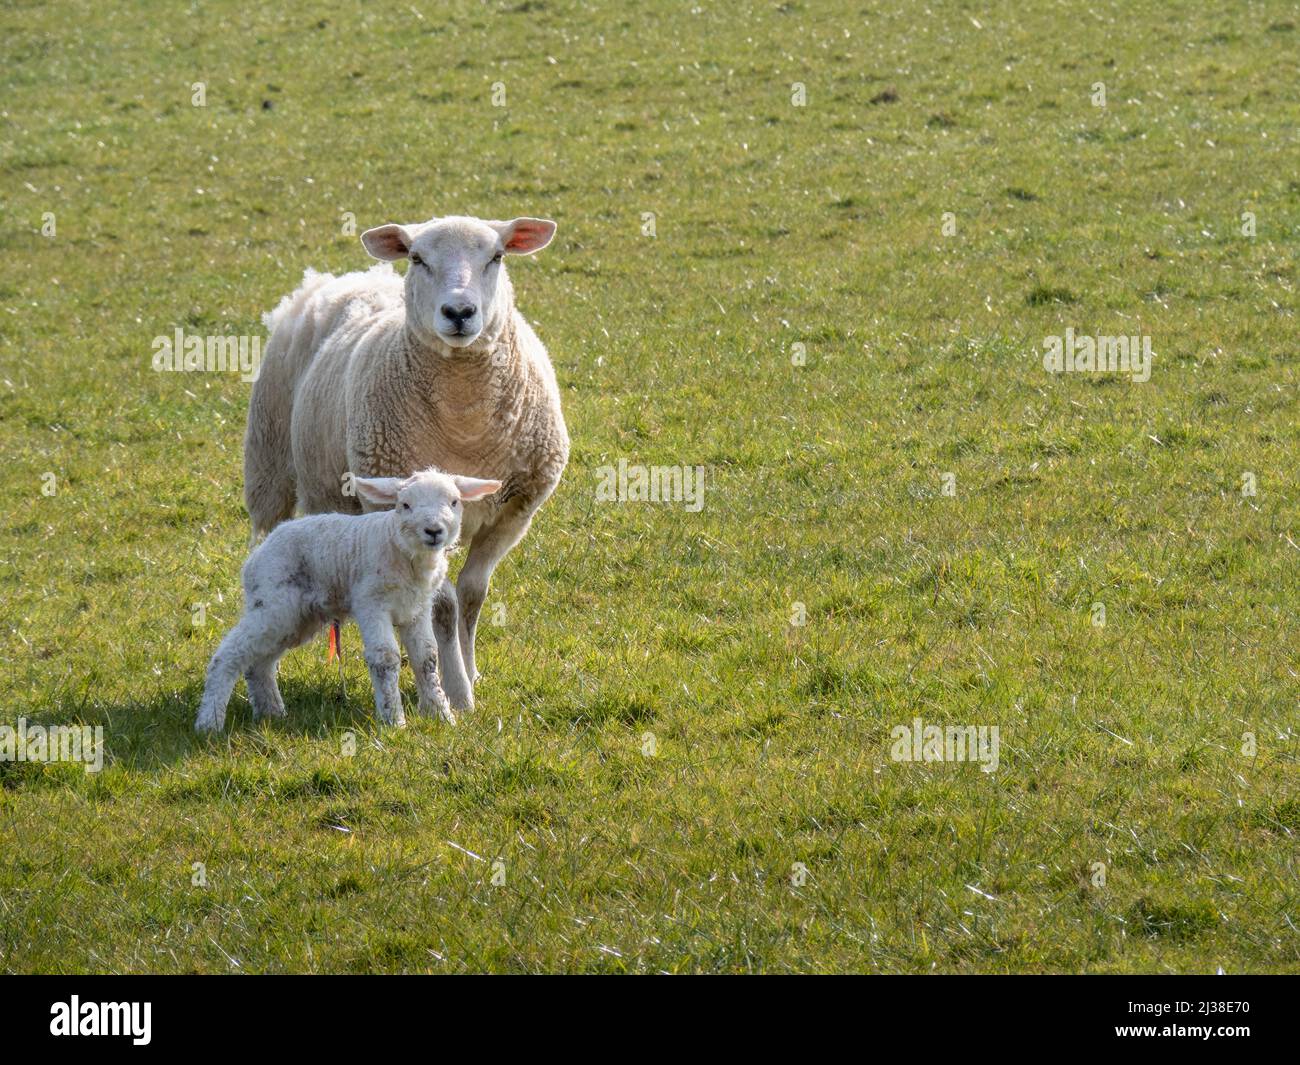 An Easycare breed ewe and her newborn lamb. With copyspace. Stock Photo